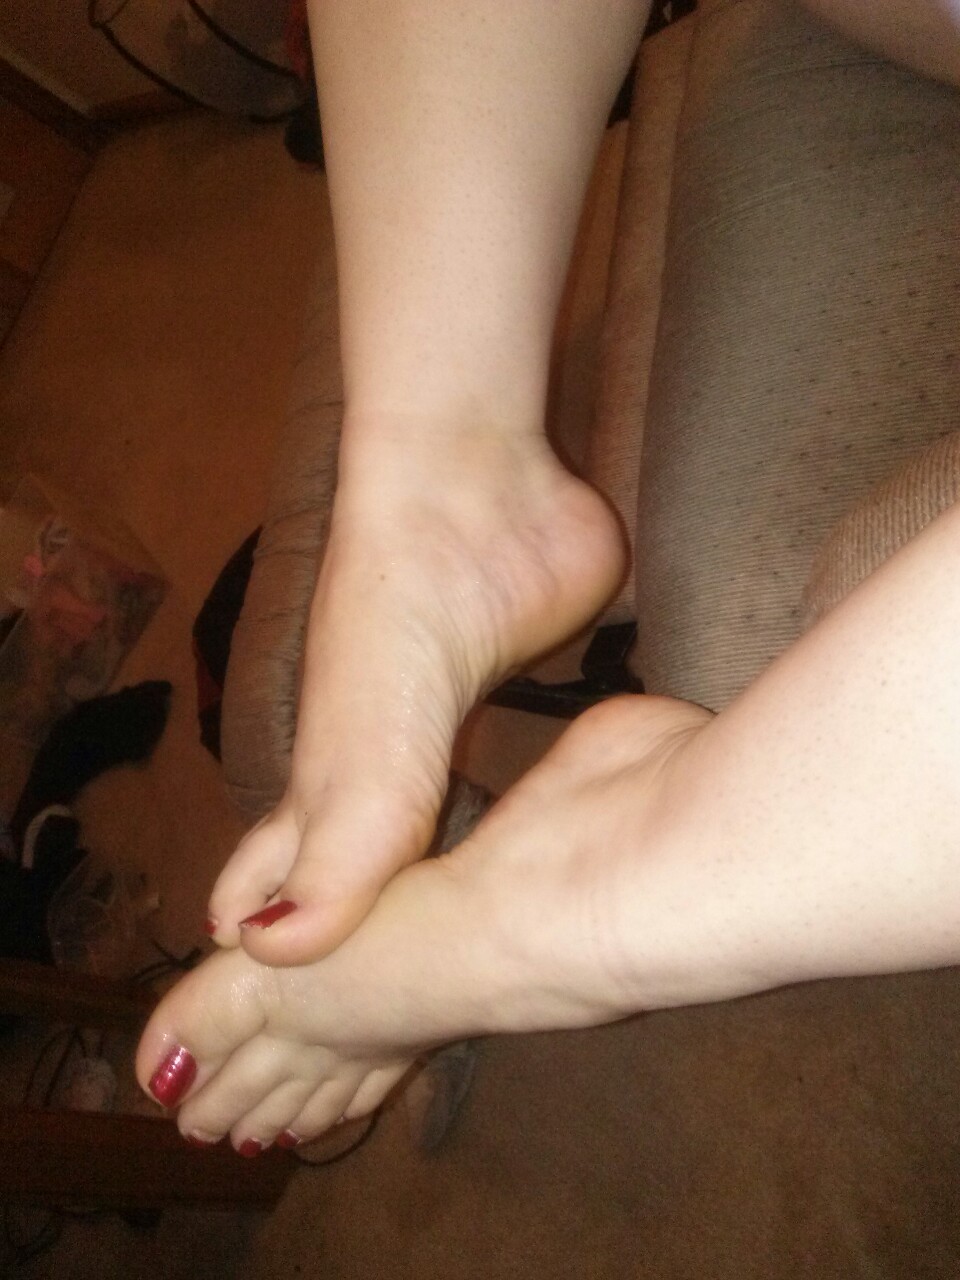 wifesbody:  The wife just hanging out with her sexy legs and feet 